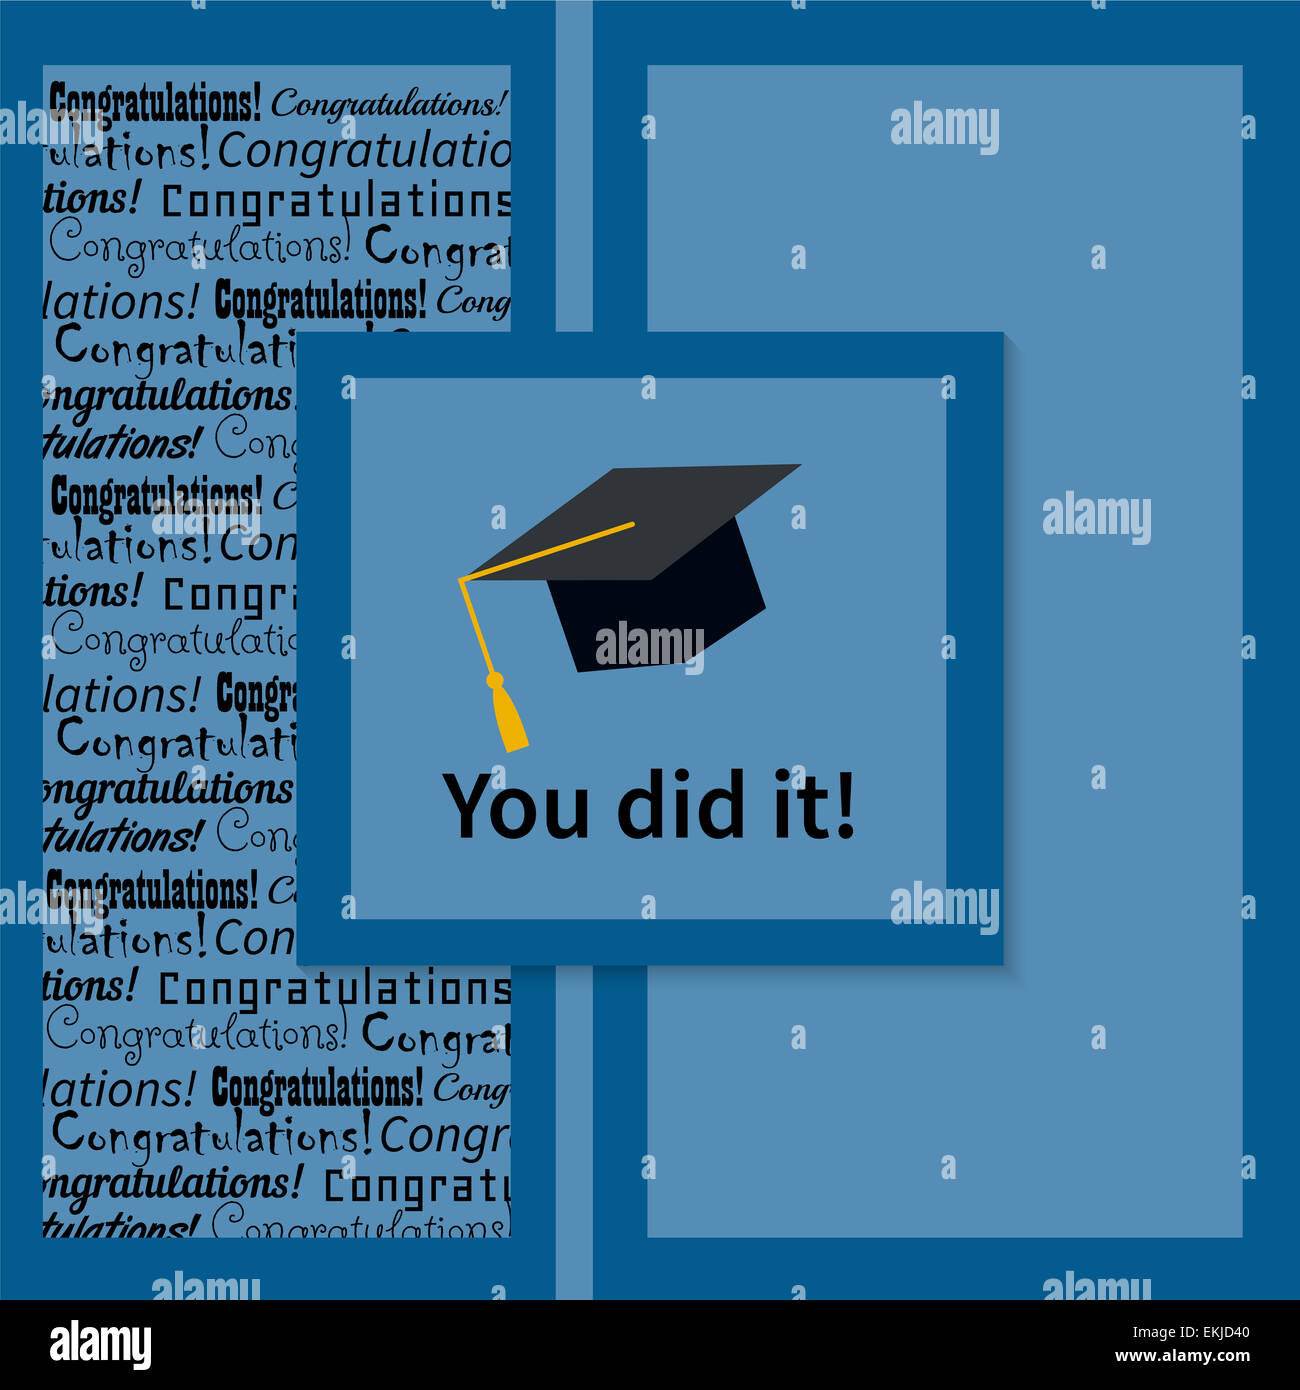 Greeting Card With Congratulations Graduate Completion of Studies Stock Photo